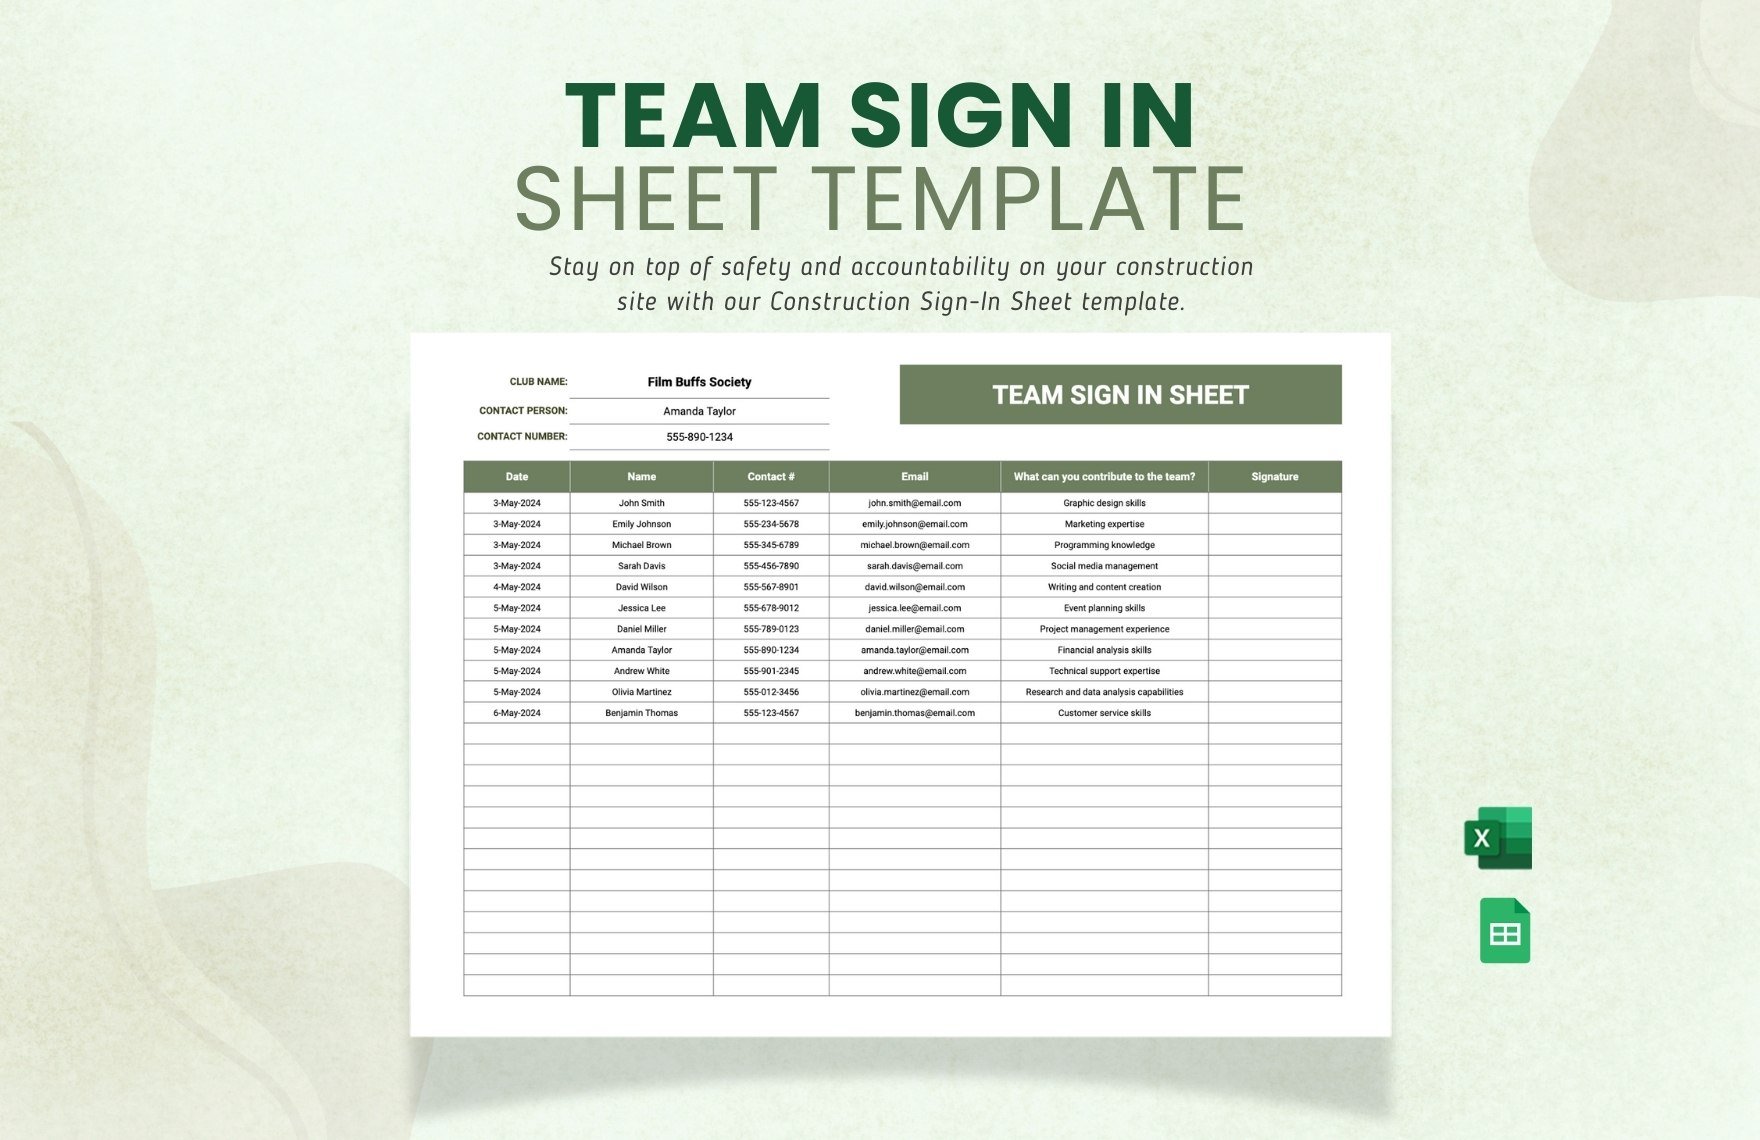 Team Sign in Sheet Template in Excel, Google Sheets